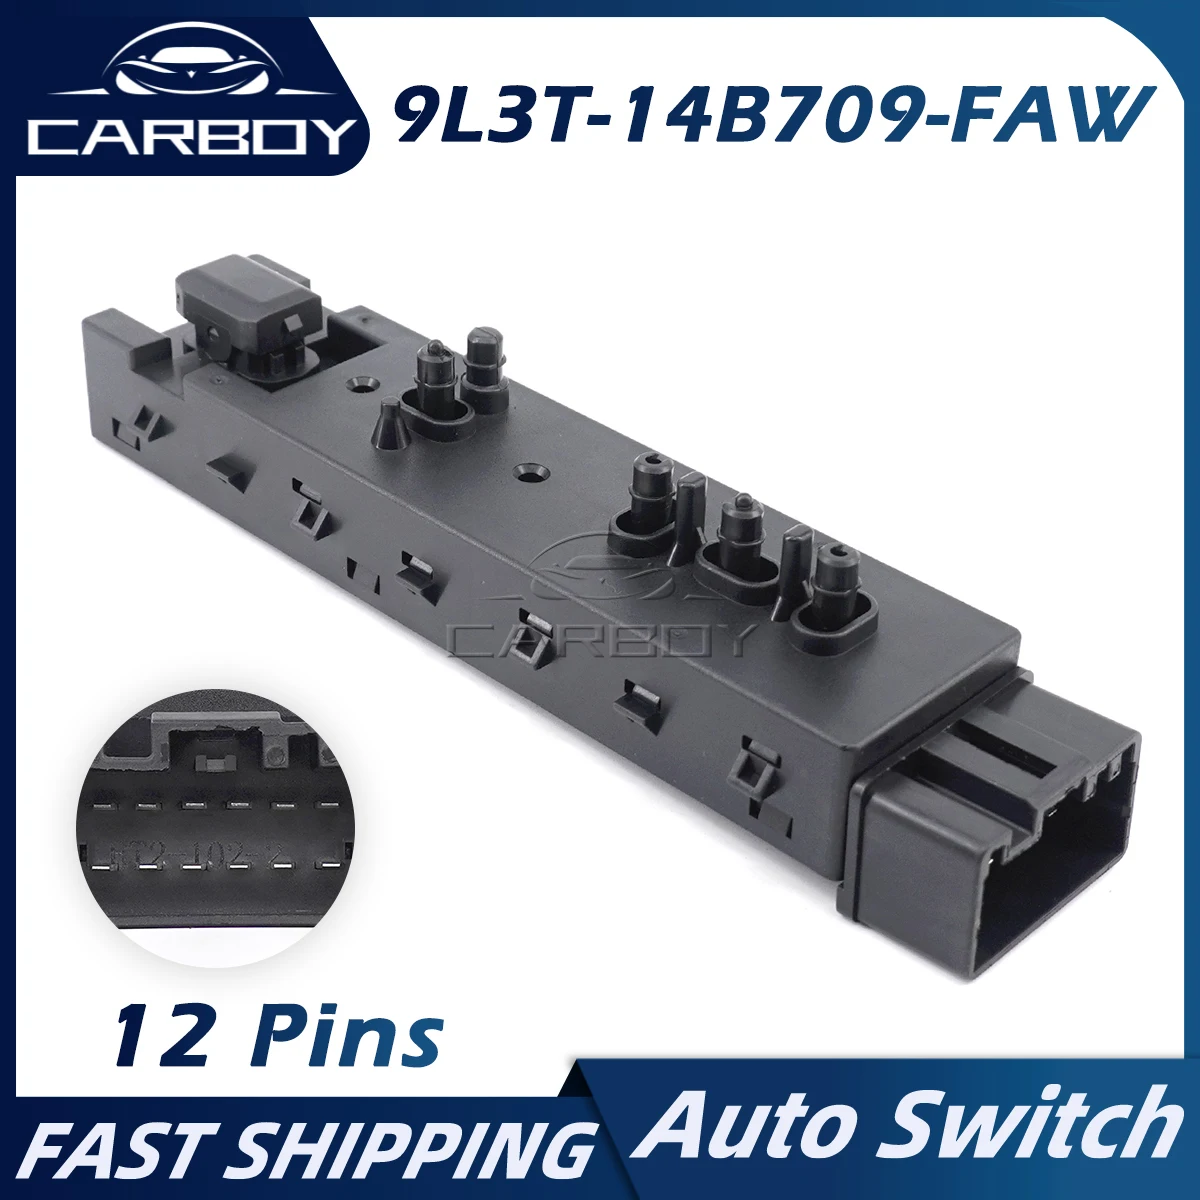 9L3T-14B709-FAW Power Seat Adjustment Control Switch For Ford Explorer Sport Trac C-Max Edge Escape Expedition F150 9L3Z14A701FB